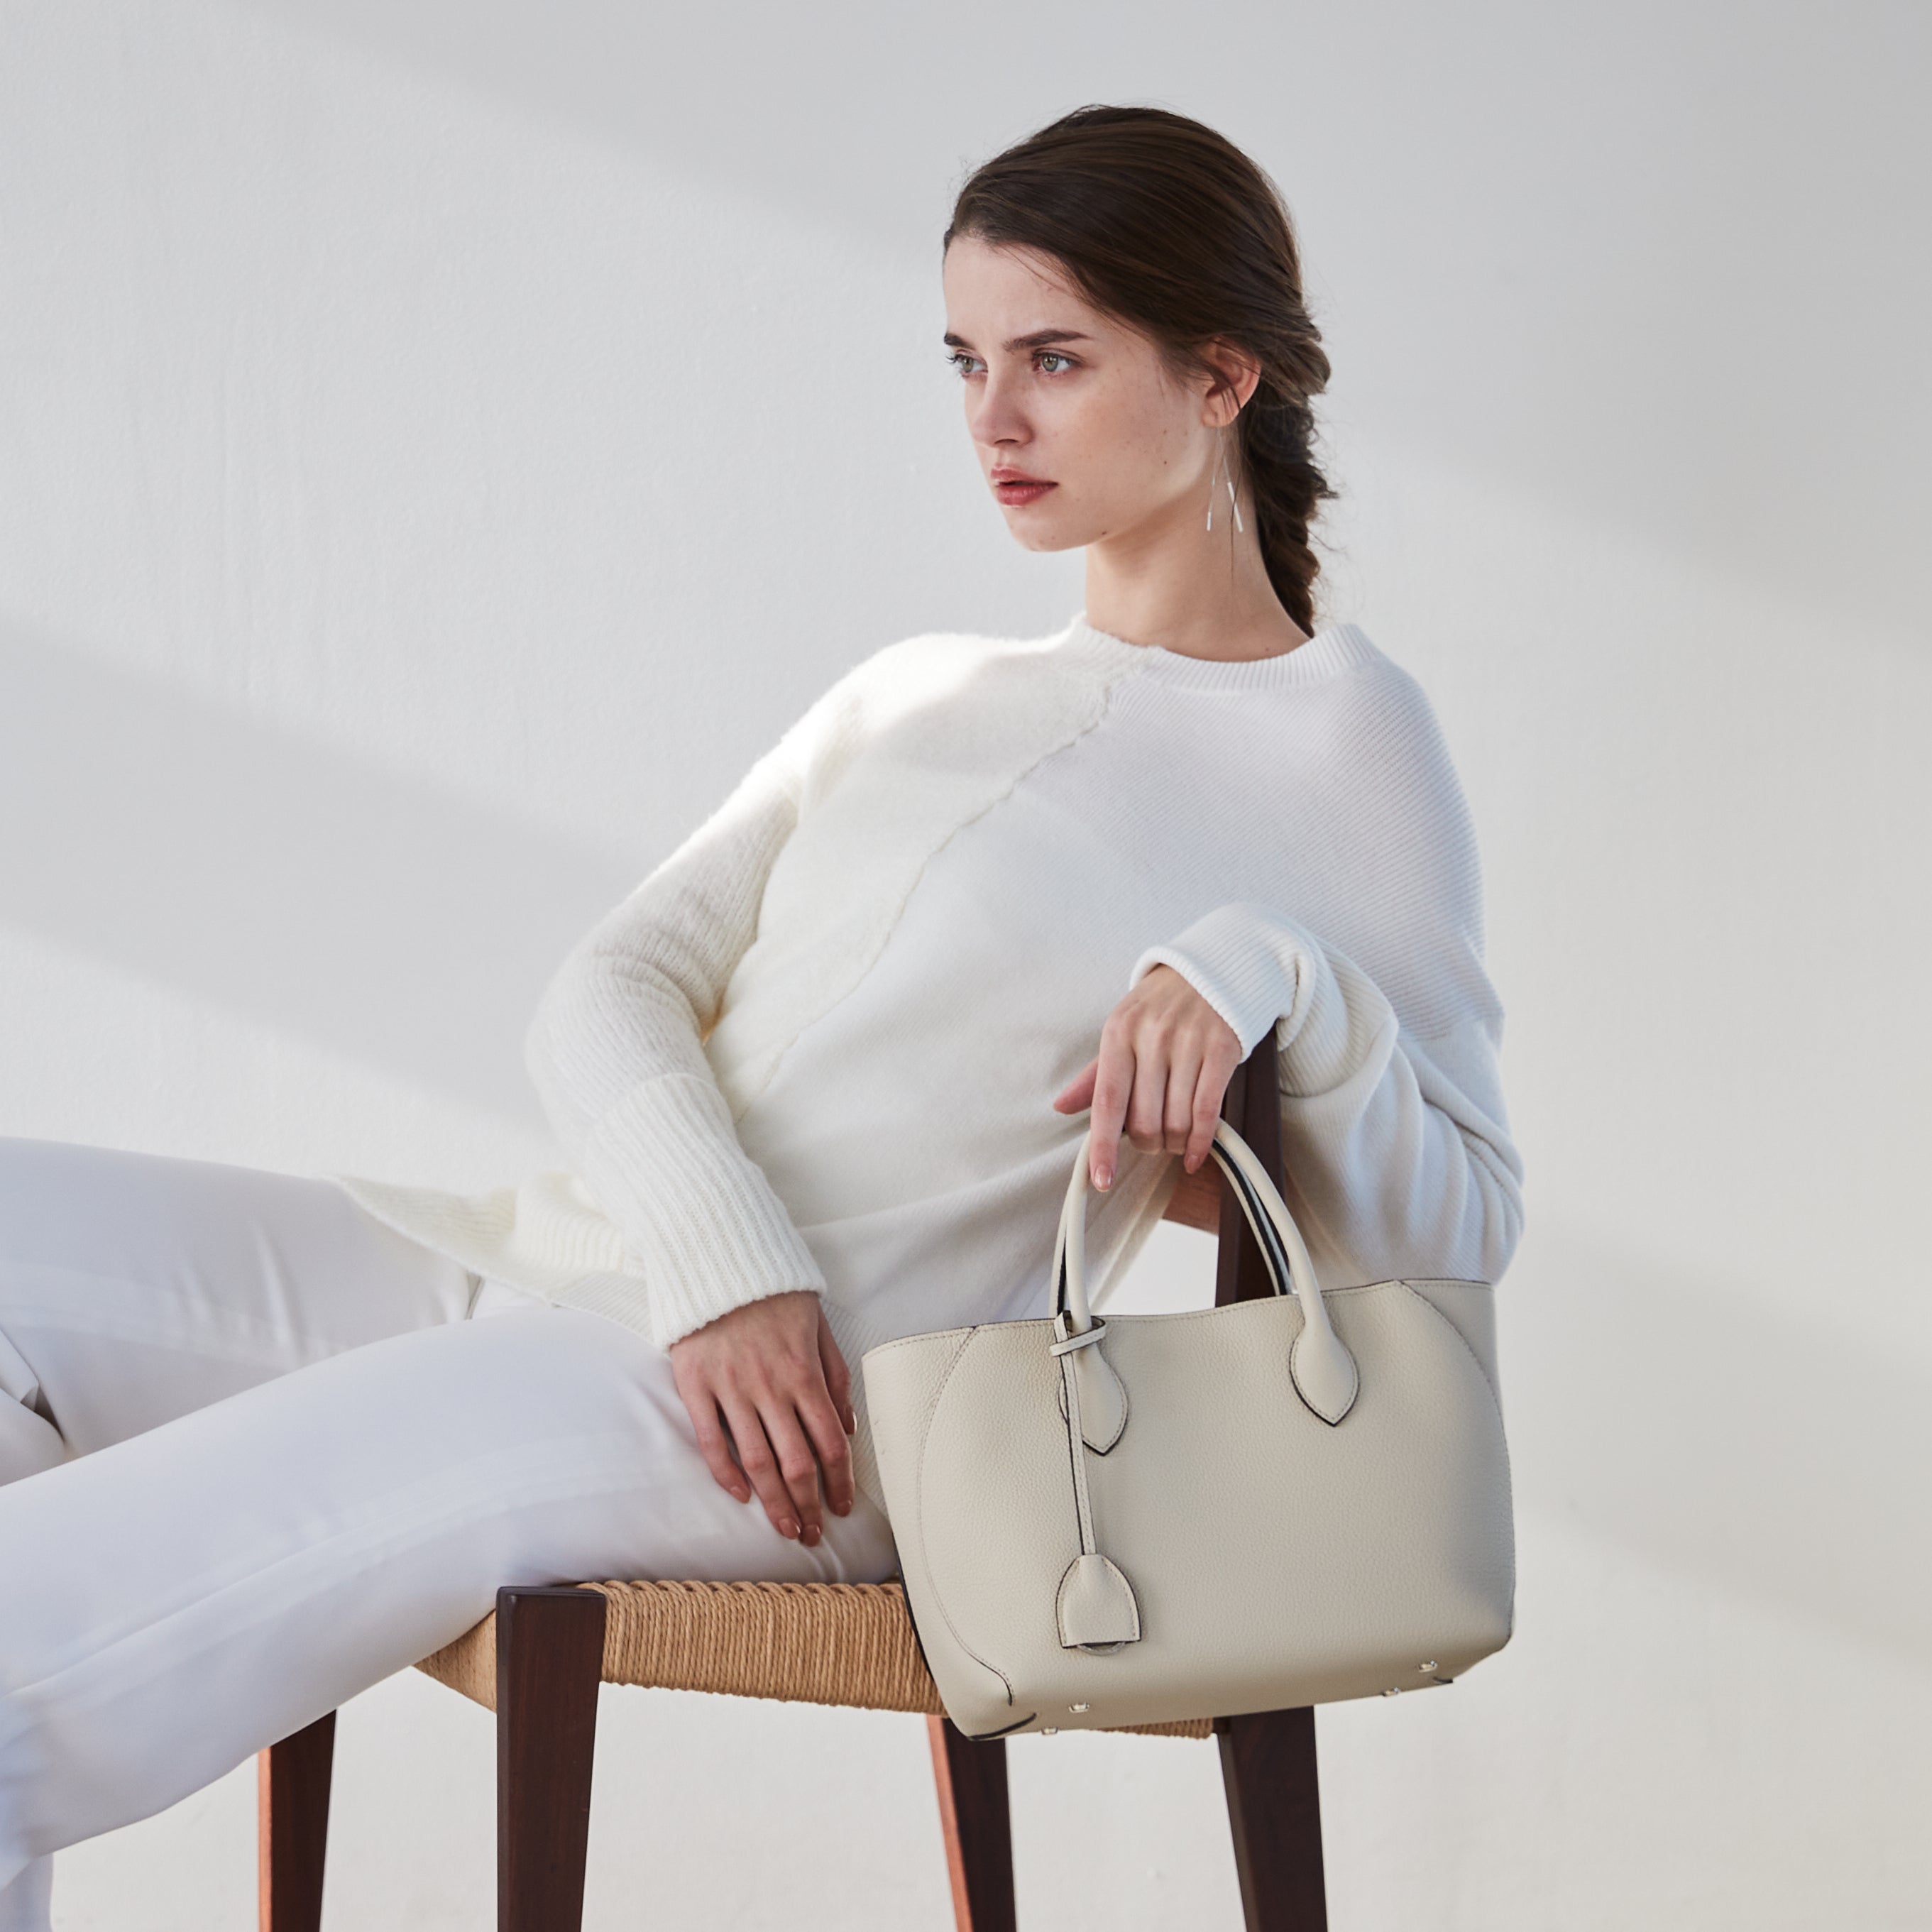 The Mia Tote Bag in Ivory is the perfect shoulder bag for any outfit and occasion.